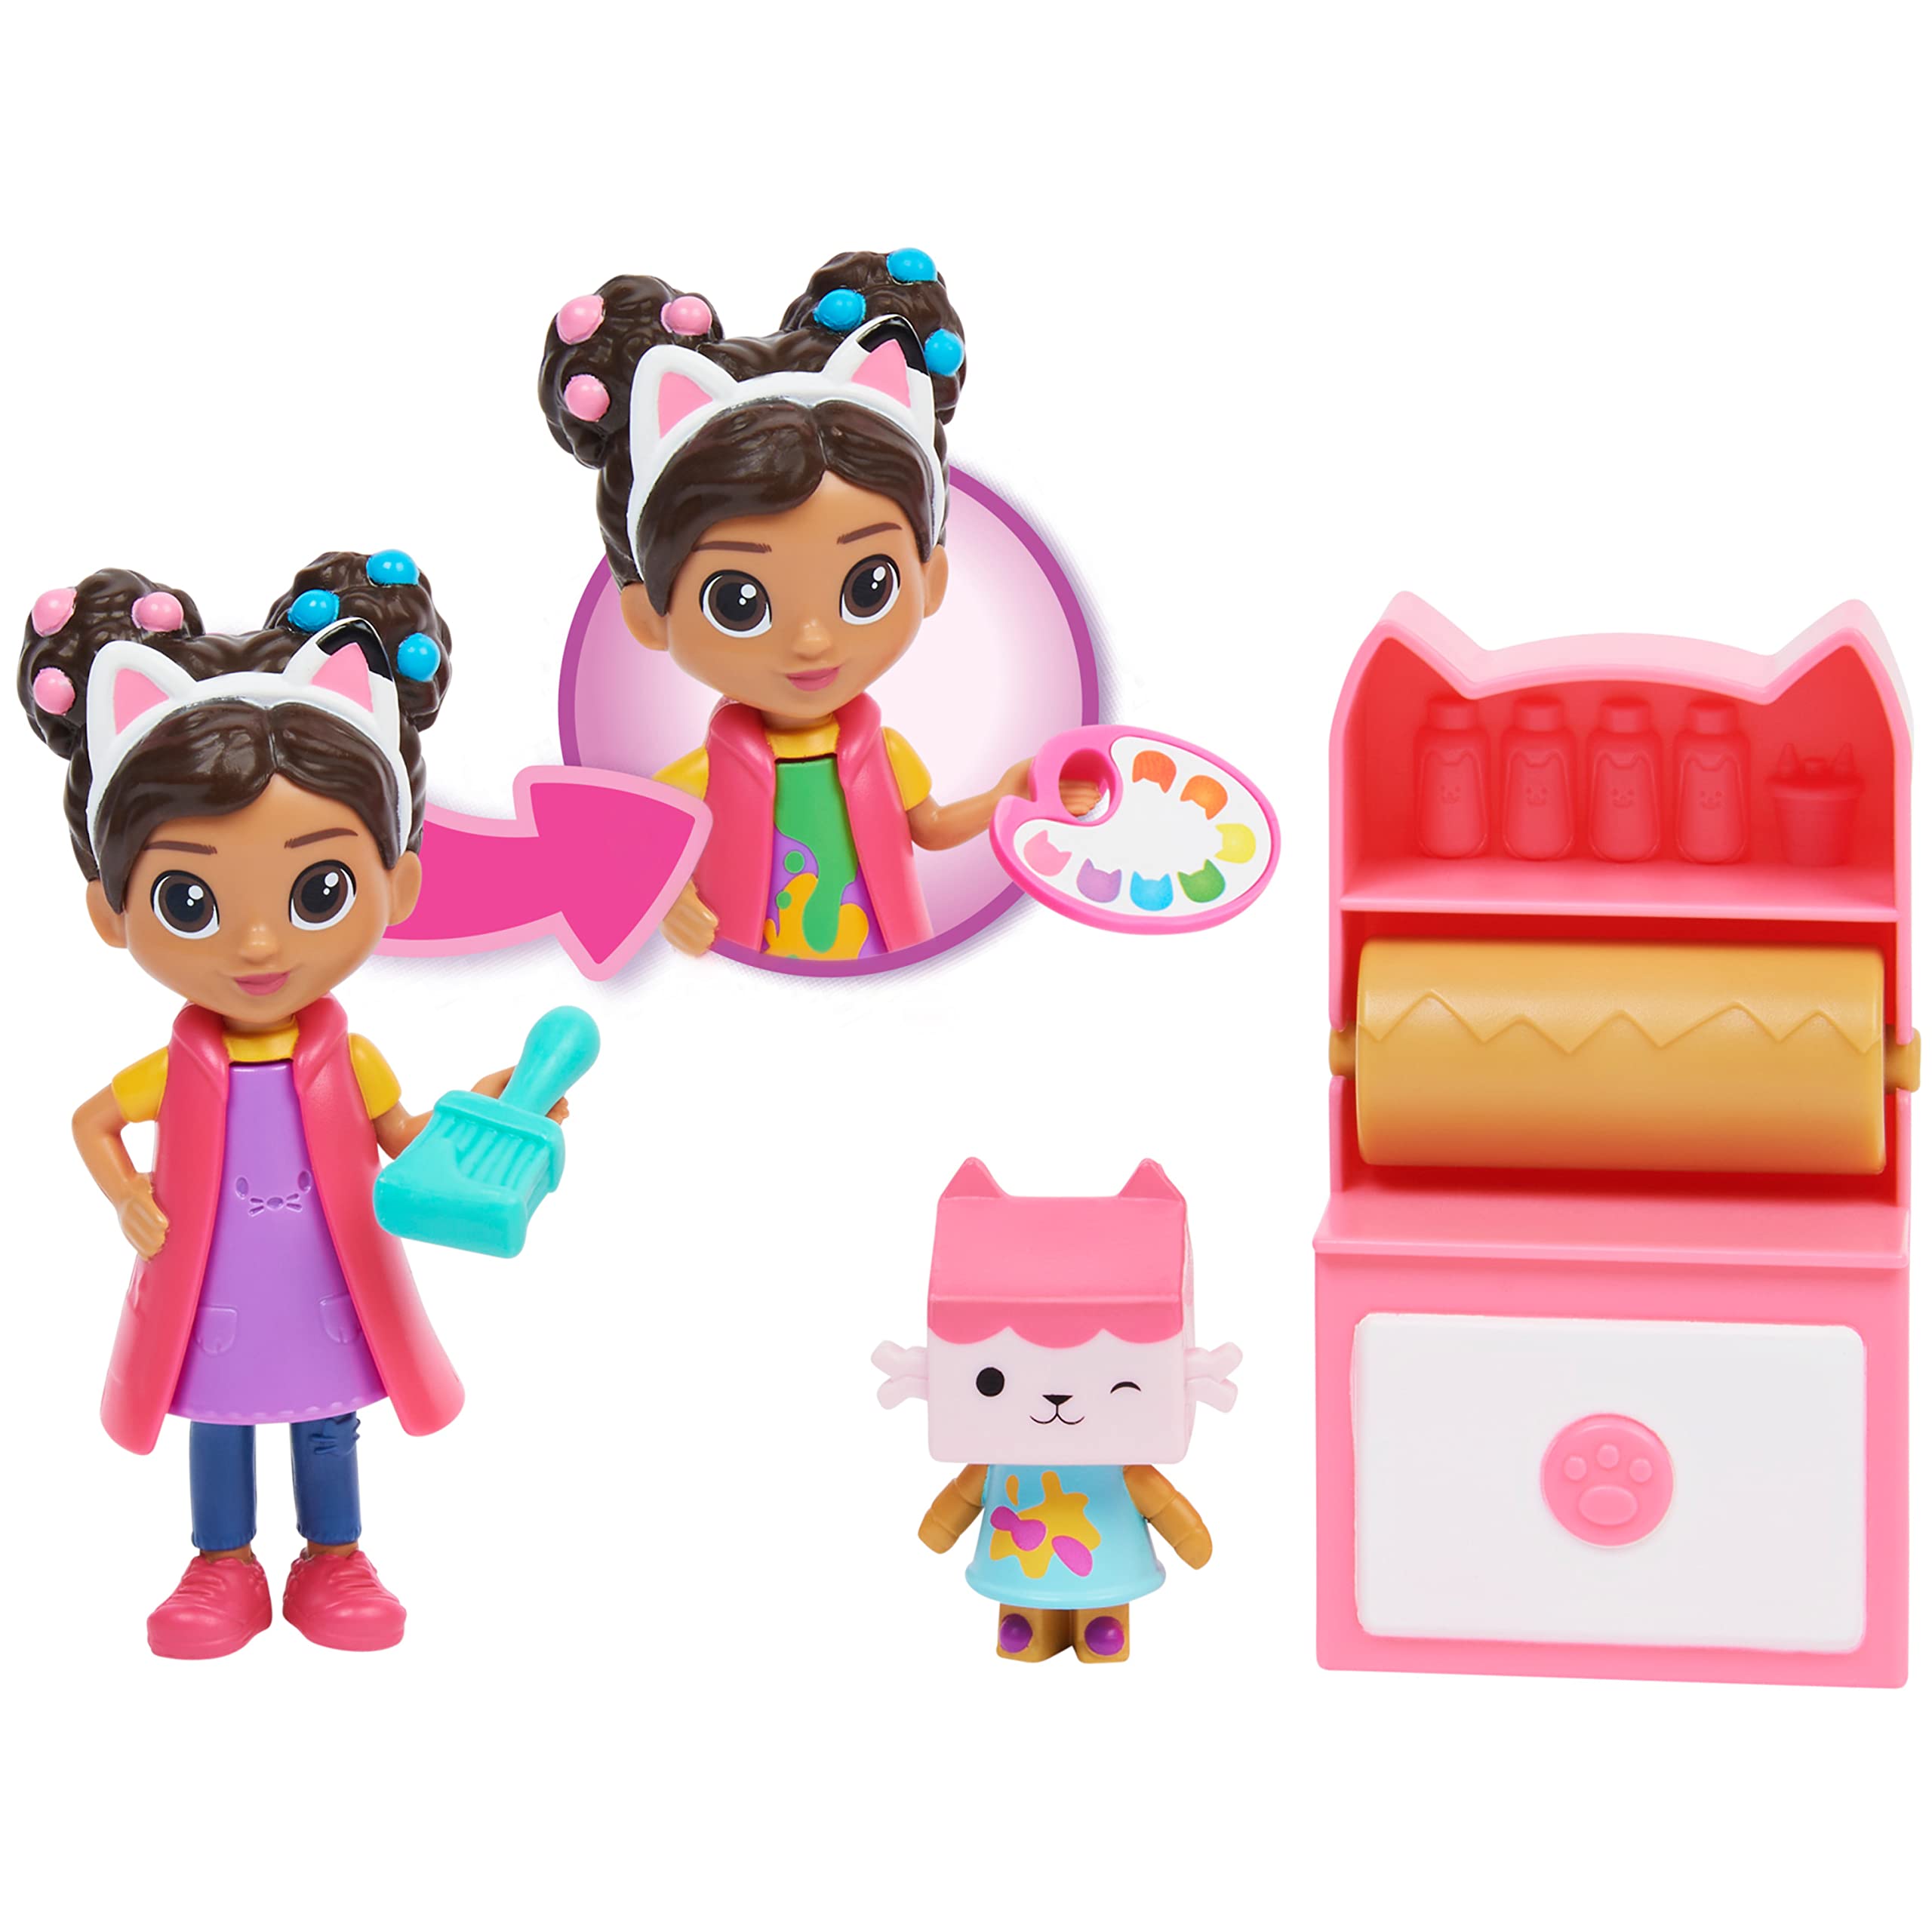 Gabby’s Dollhouse, Art Studio Set with 2 Toy Figures, 2 Accessories, Delivery and Furniture Piece, Kids Toys for Ages 3 and up